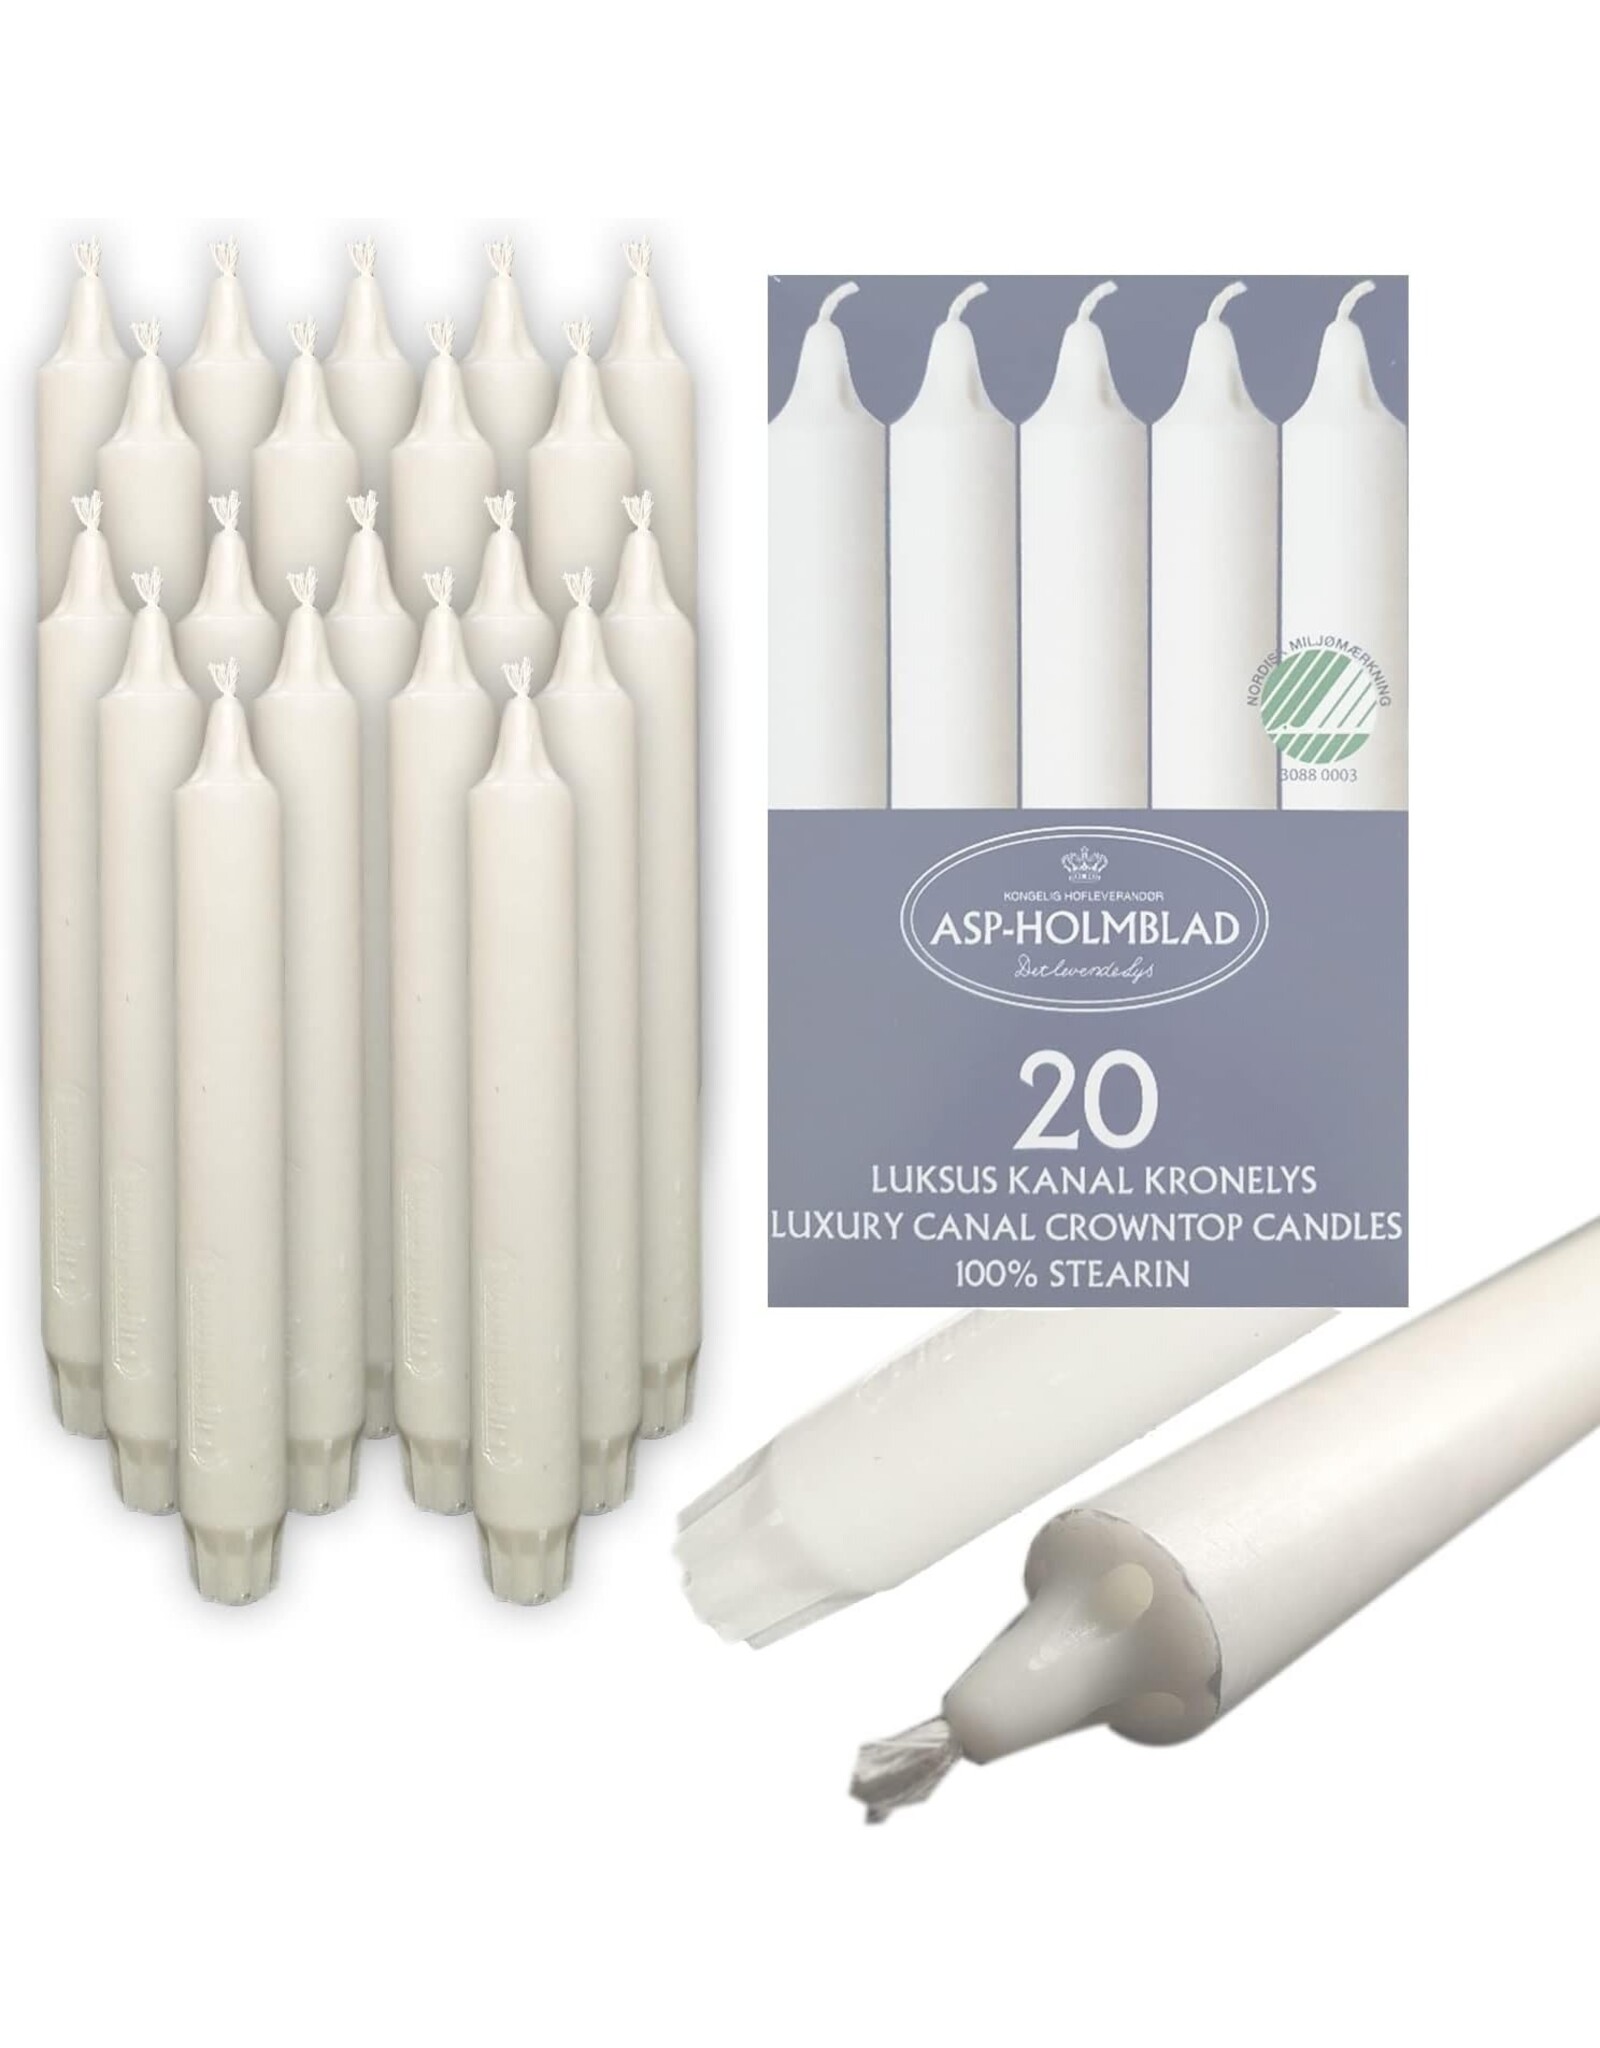 Danish Dripless Channel Candles Box of 20